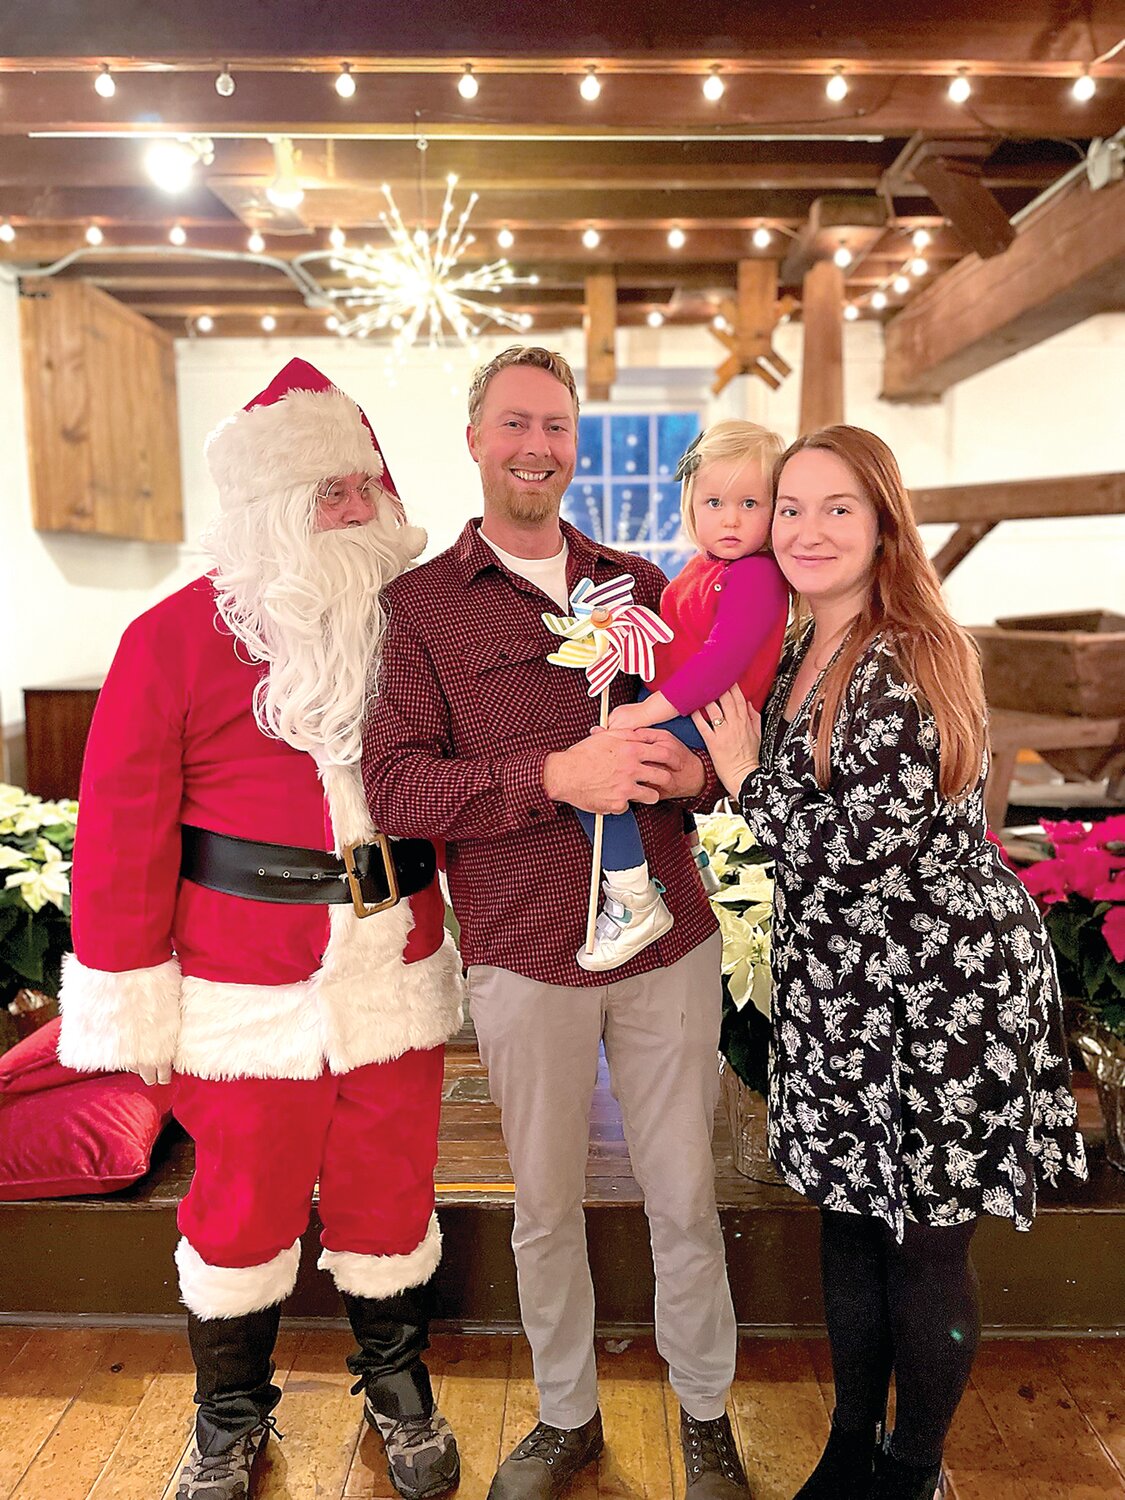 Curtis Klingler, Clara Phillips and Anna Klingler pose with Santa Claus at the Prallsville Mills Holiday Extravaganza for its members and the community on Dec. 10.